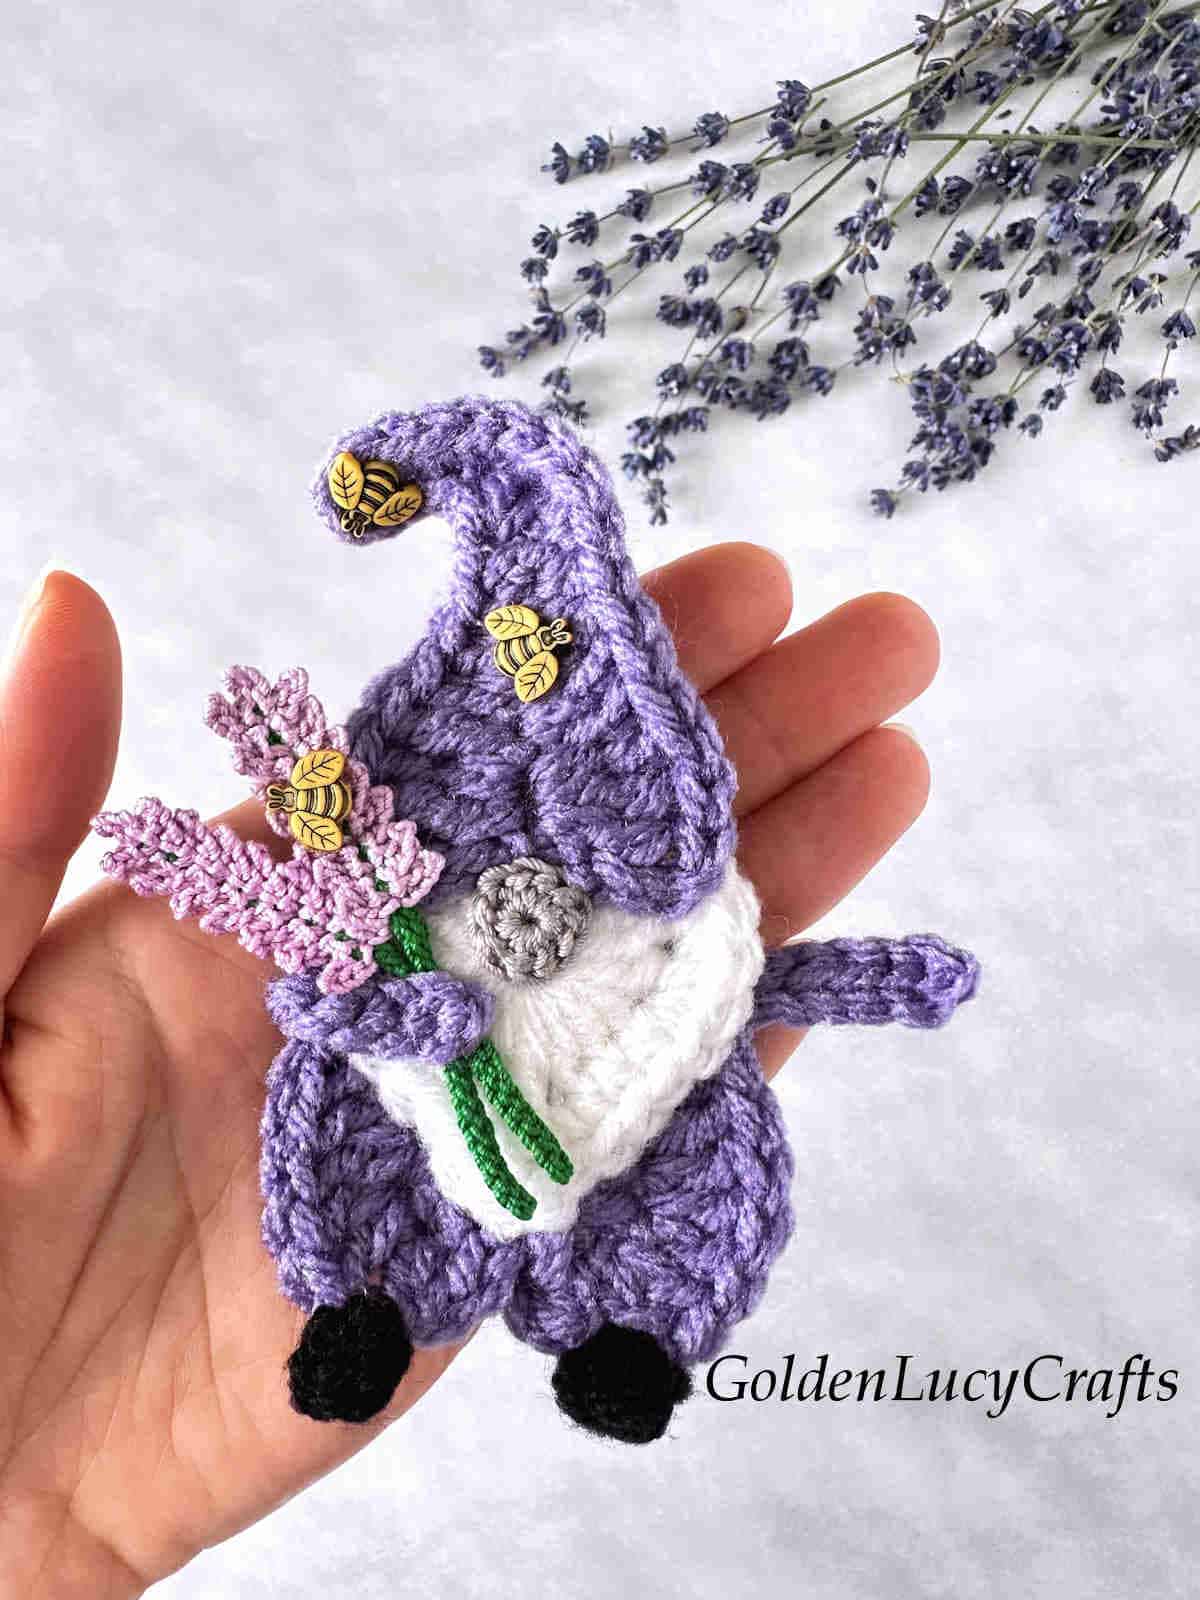 Crochet lavender gnome in the palm of a hand.